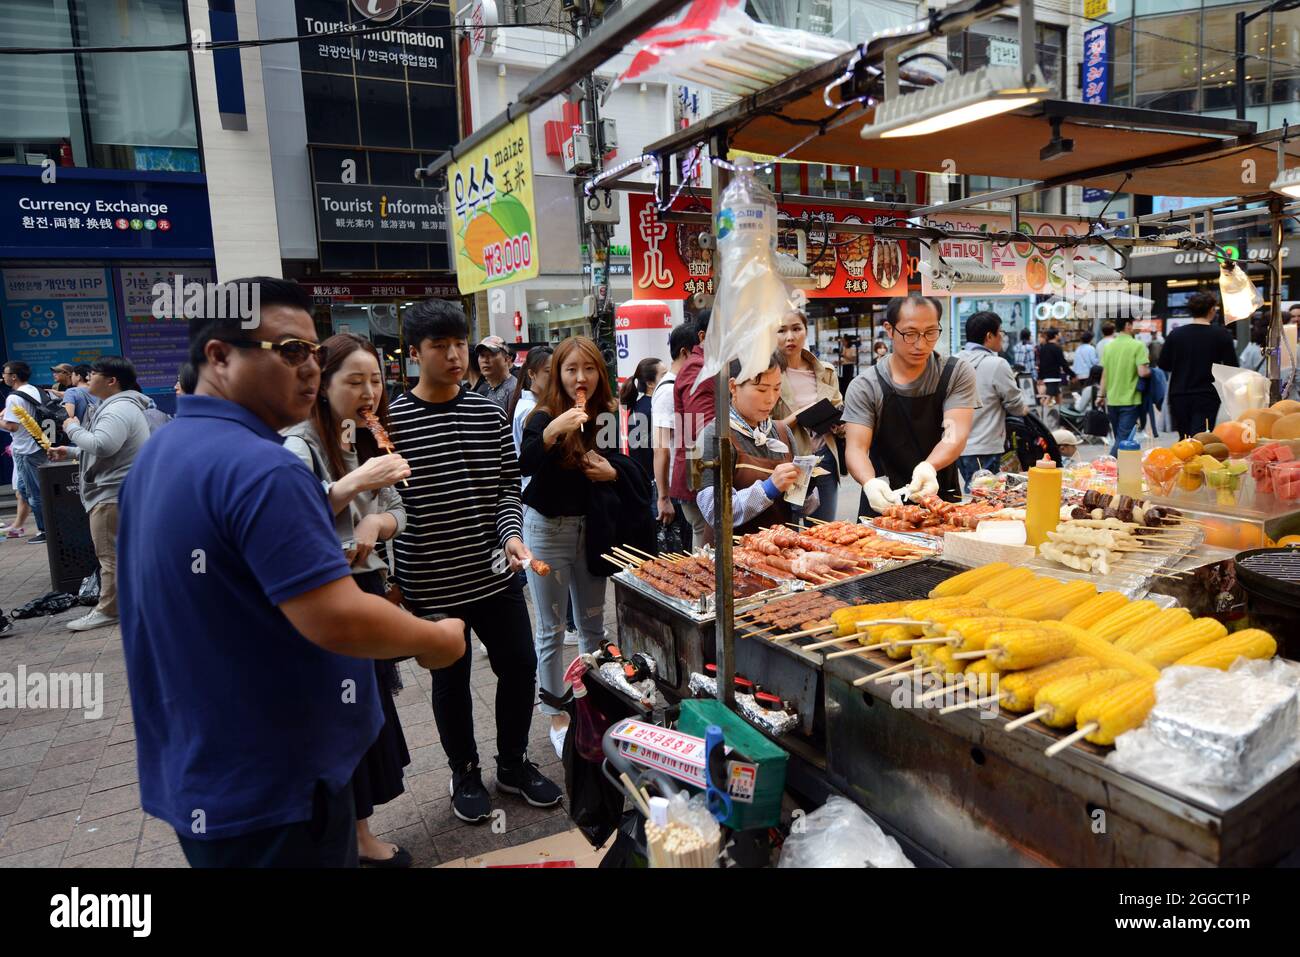 Street Food Vendors At The Popular Shopping District Of Myeongdong